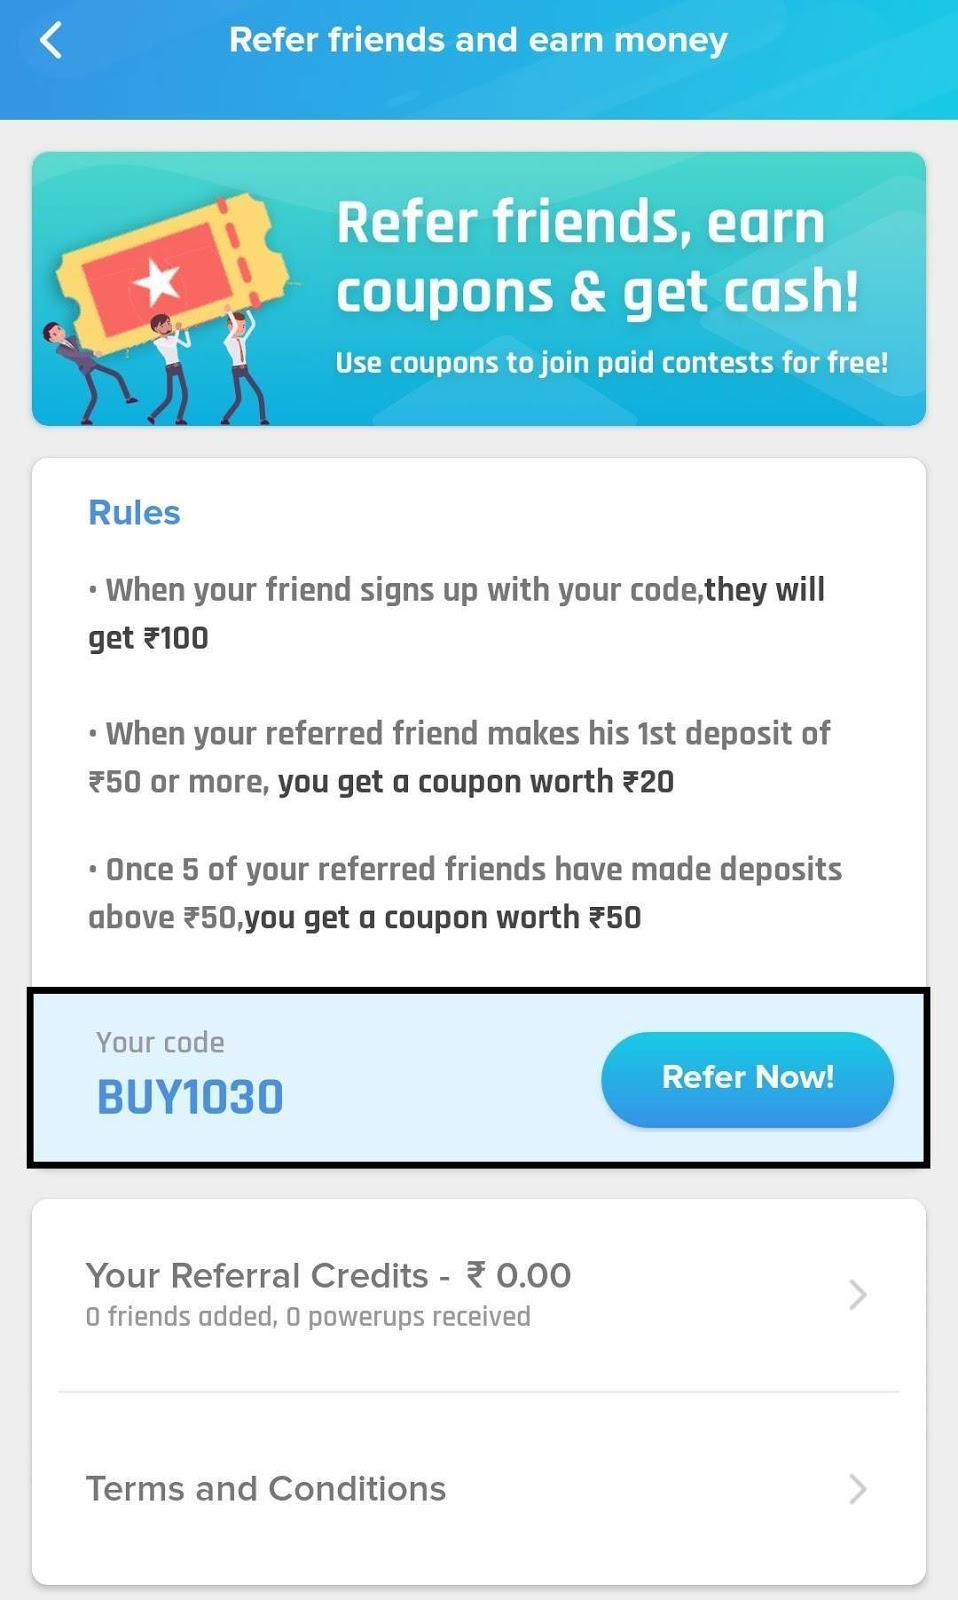 nostra-pro-app-referral-code-earn-coupons-win-real-money-makemyway